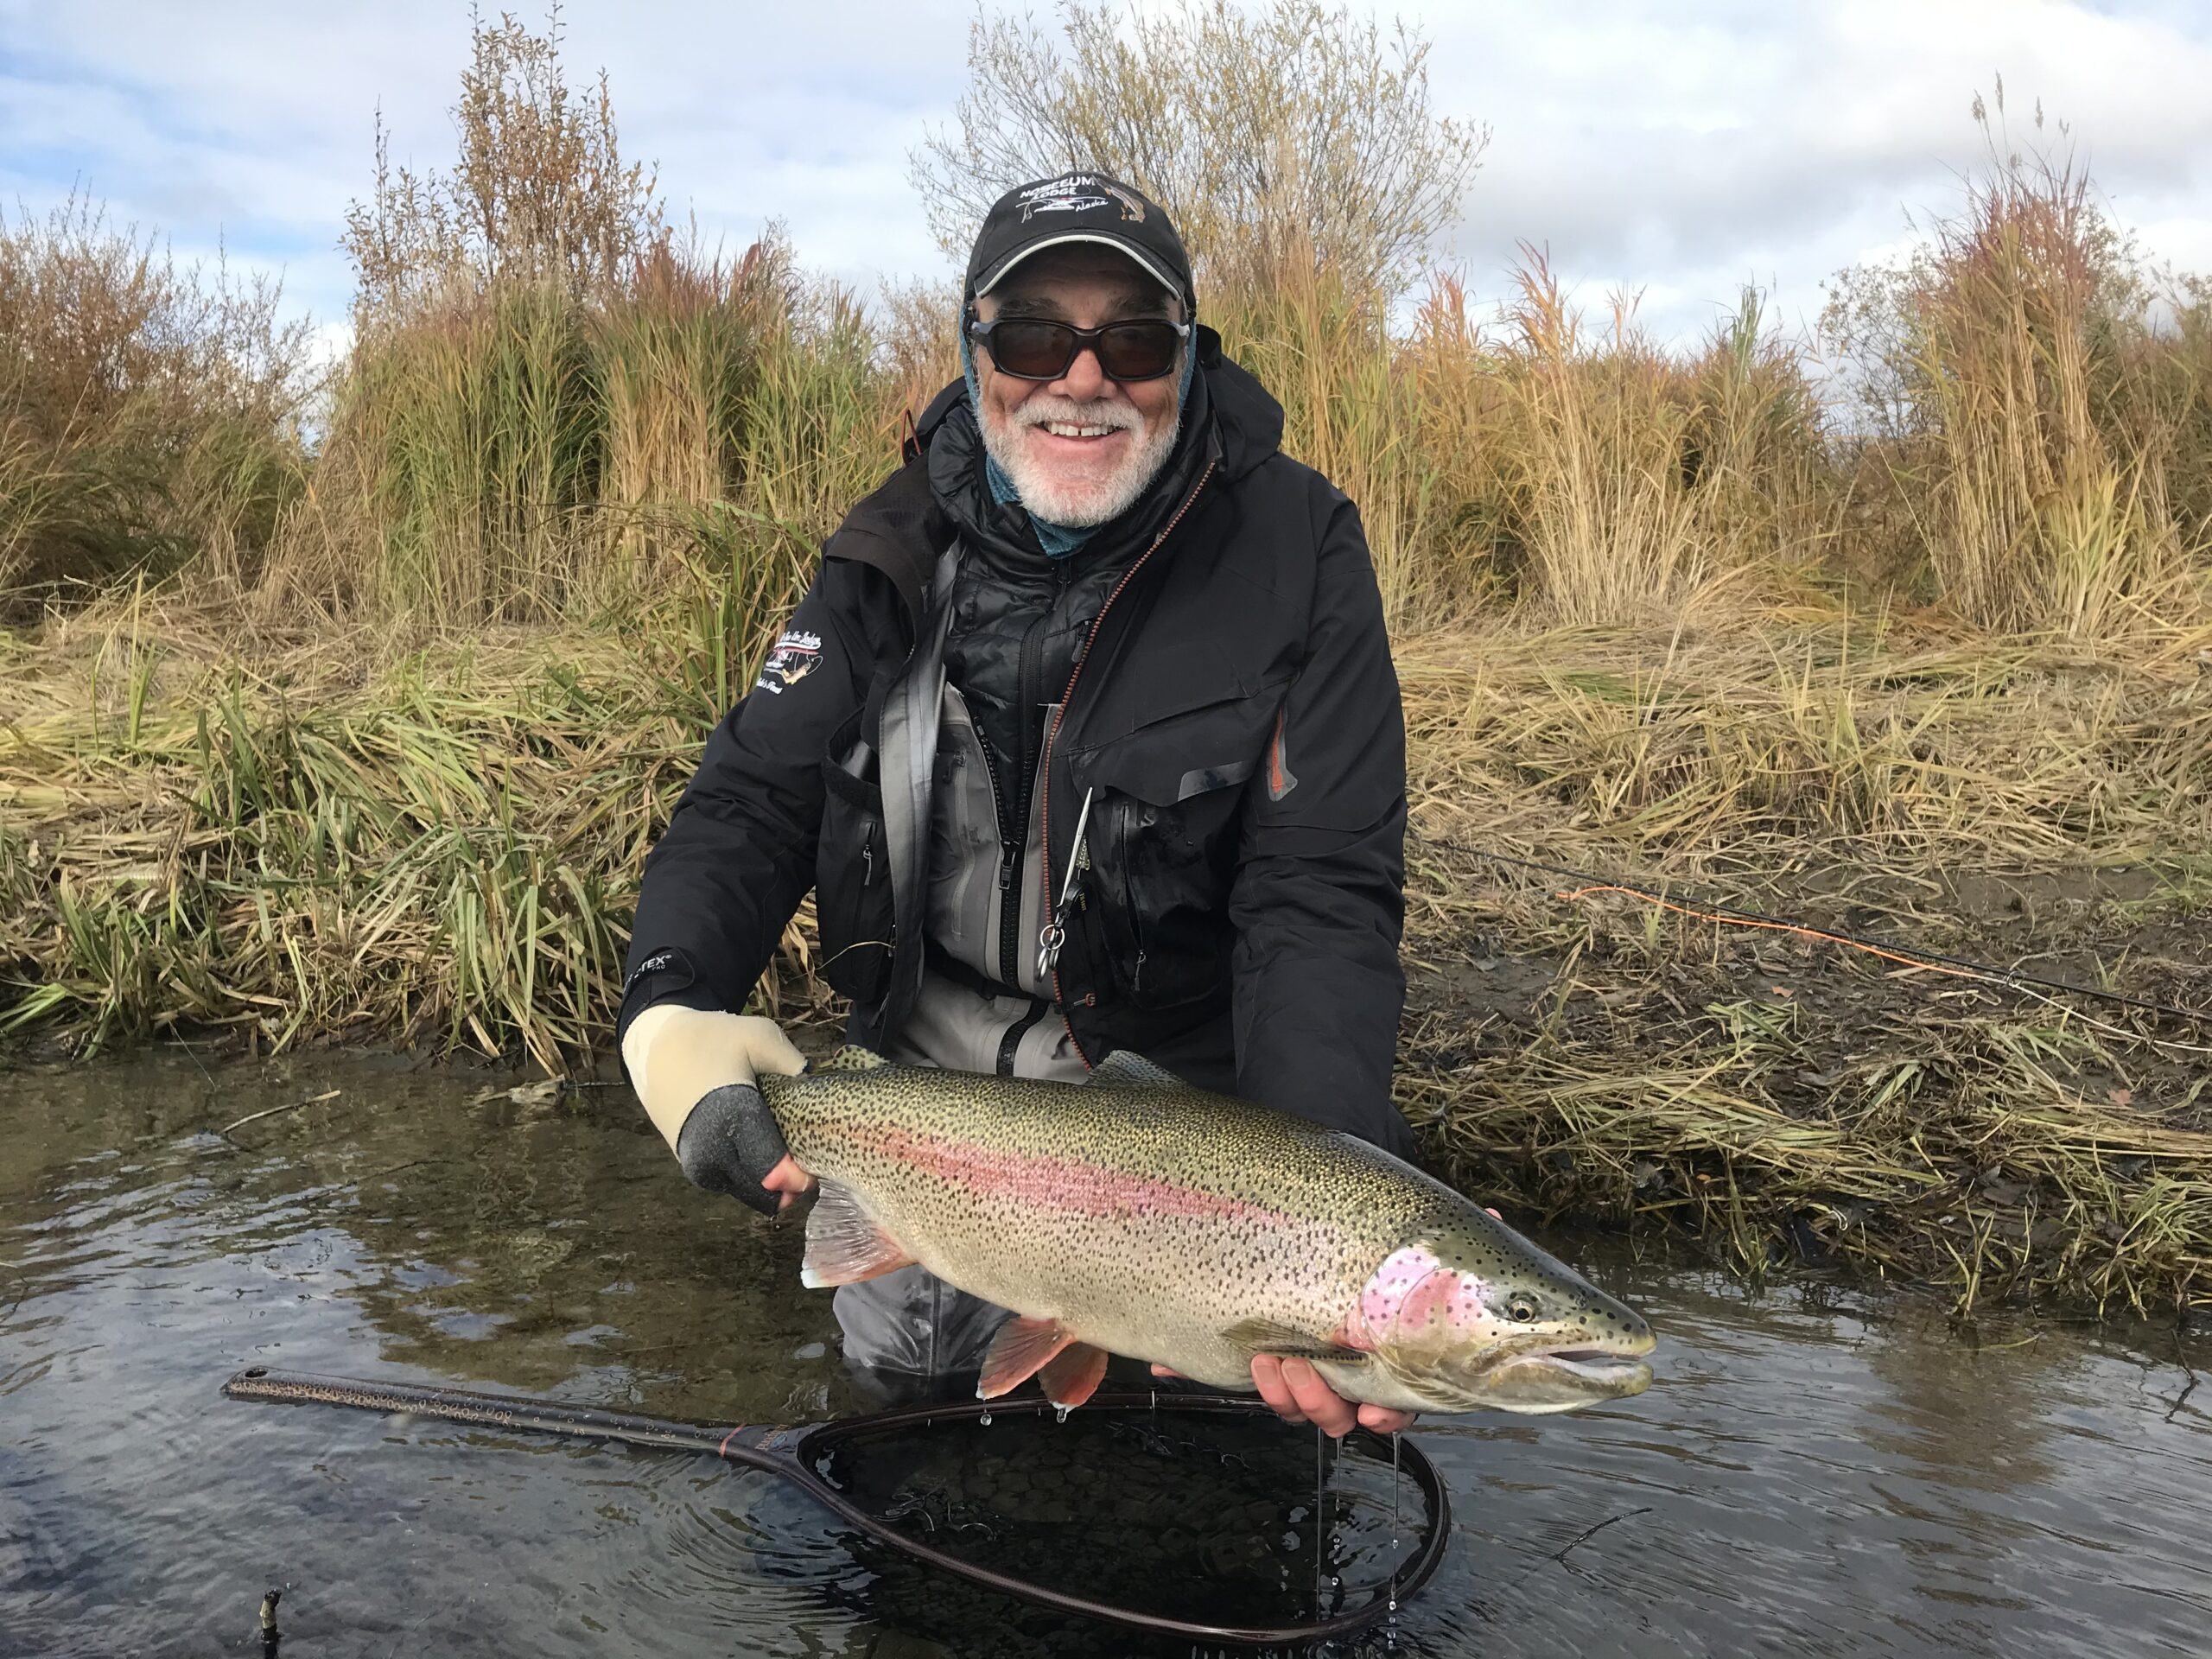 Guided Fly Fishing Trips in Alaska - Far Out Fly Fishing